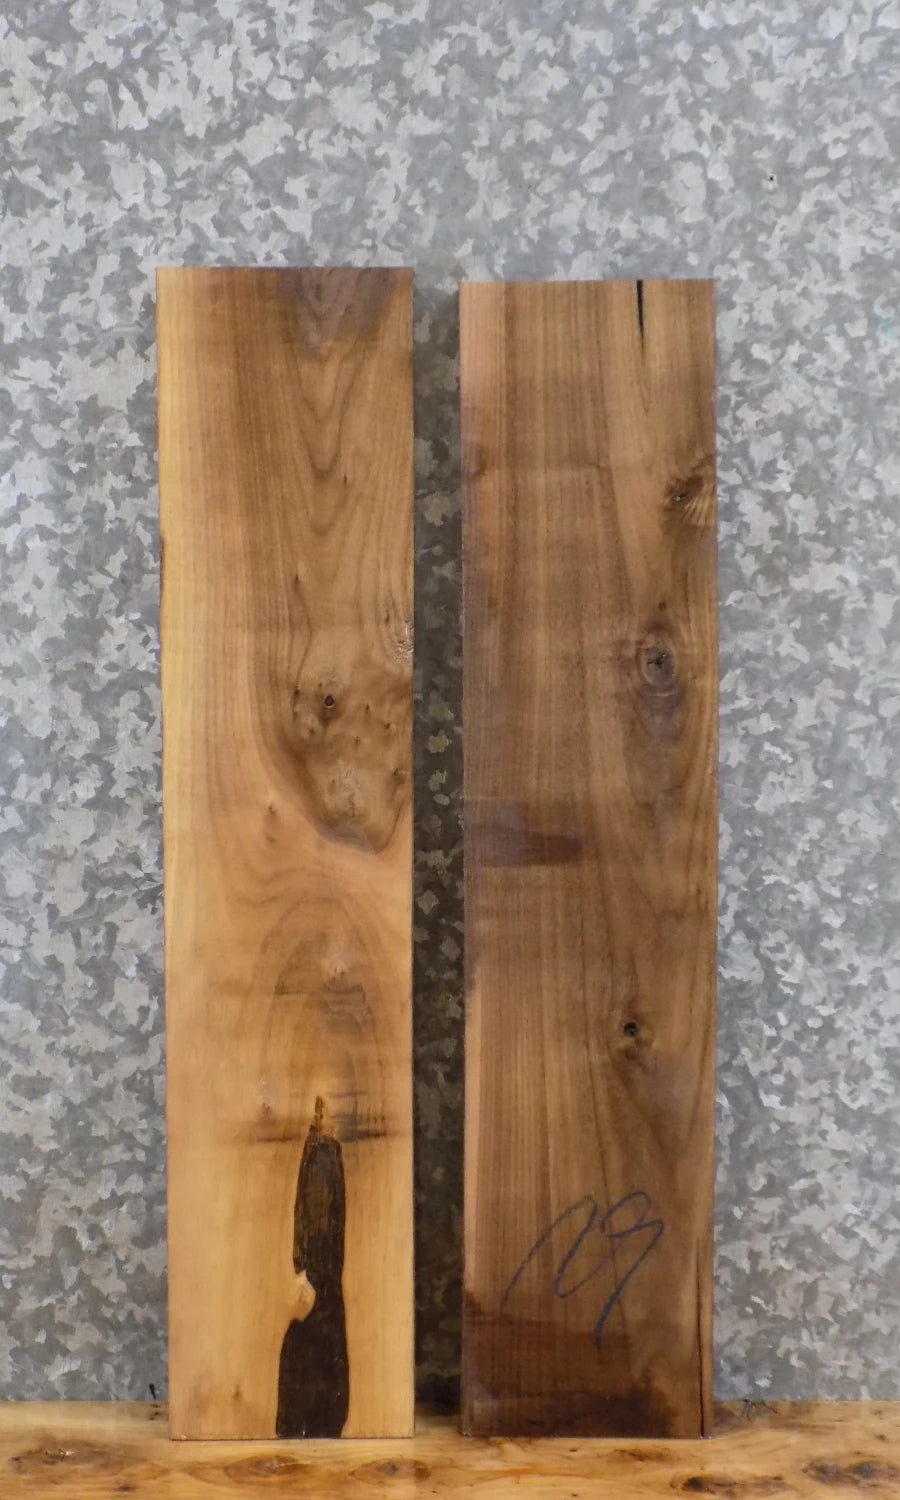 2- Reclaimed Black Walnut Project/Craft Pack Wood Boards 5634-5635